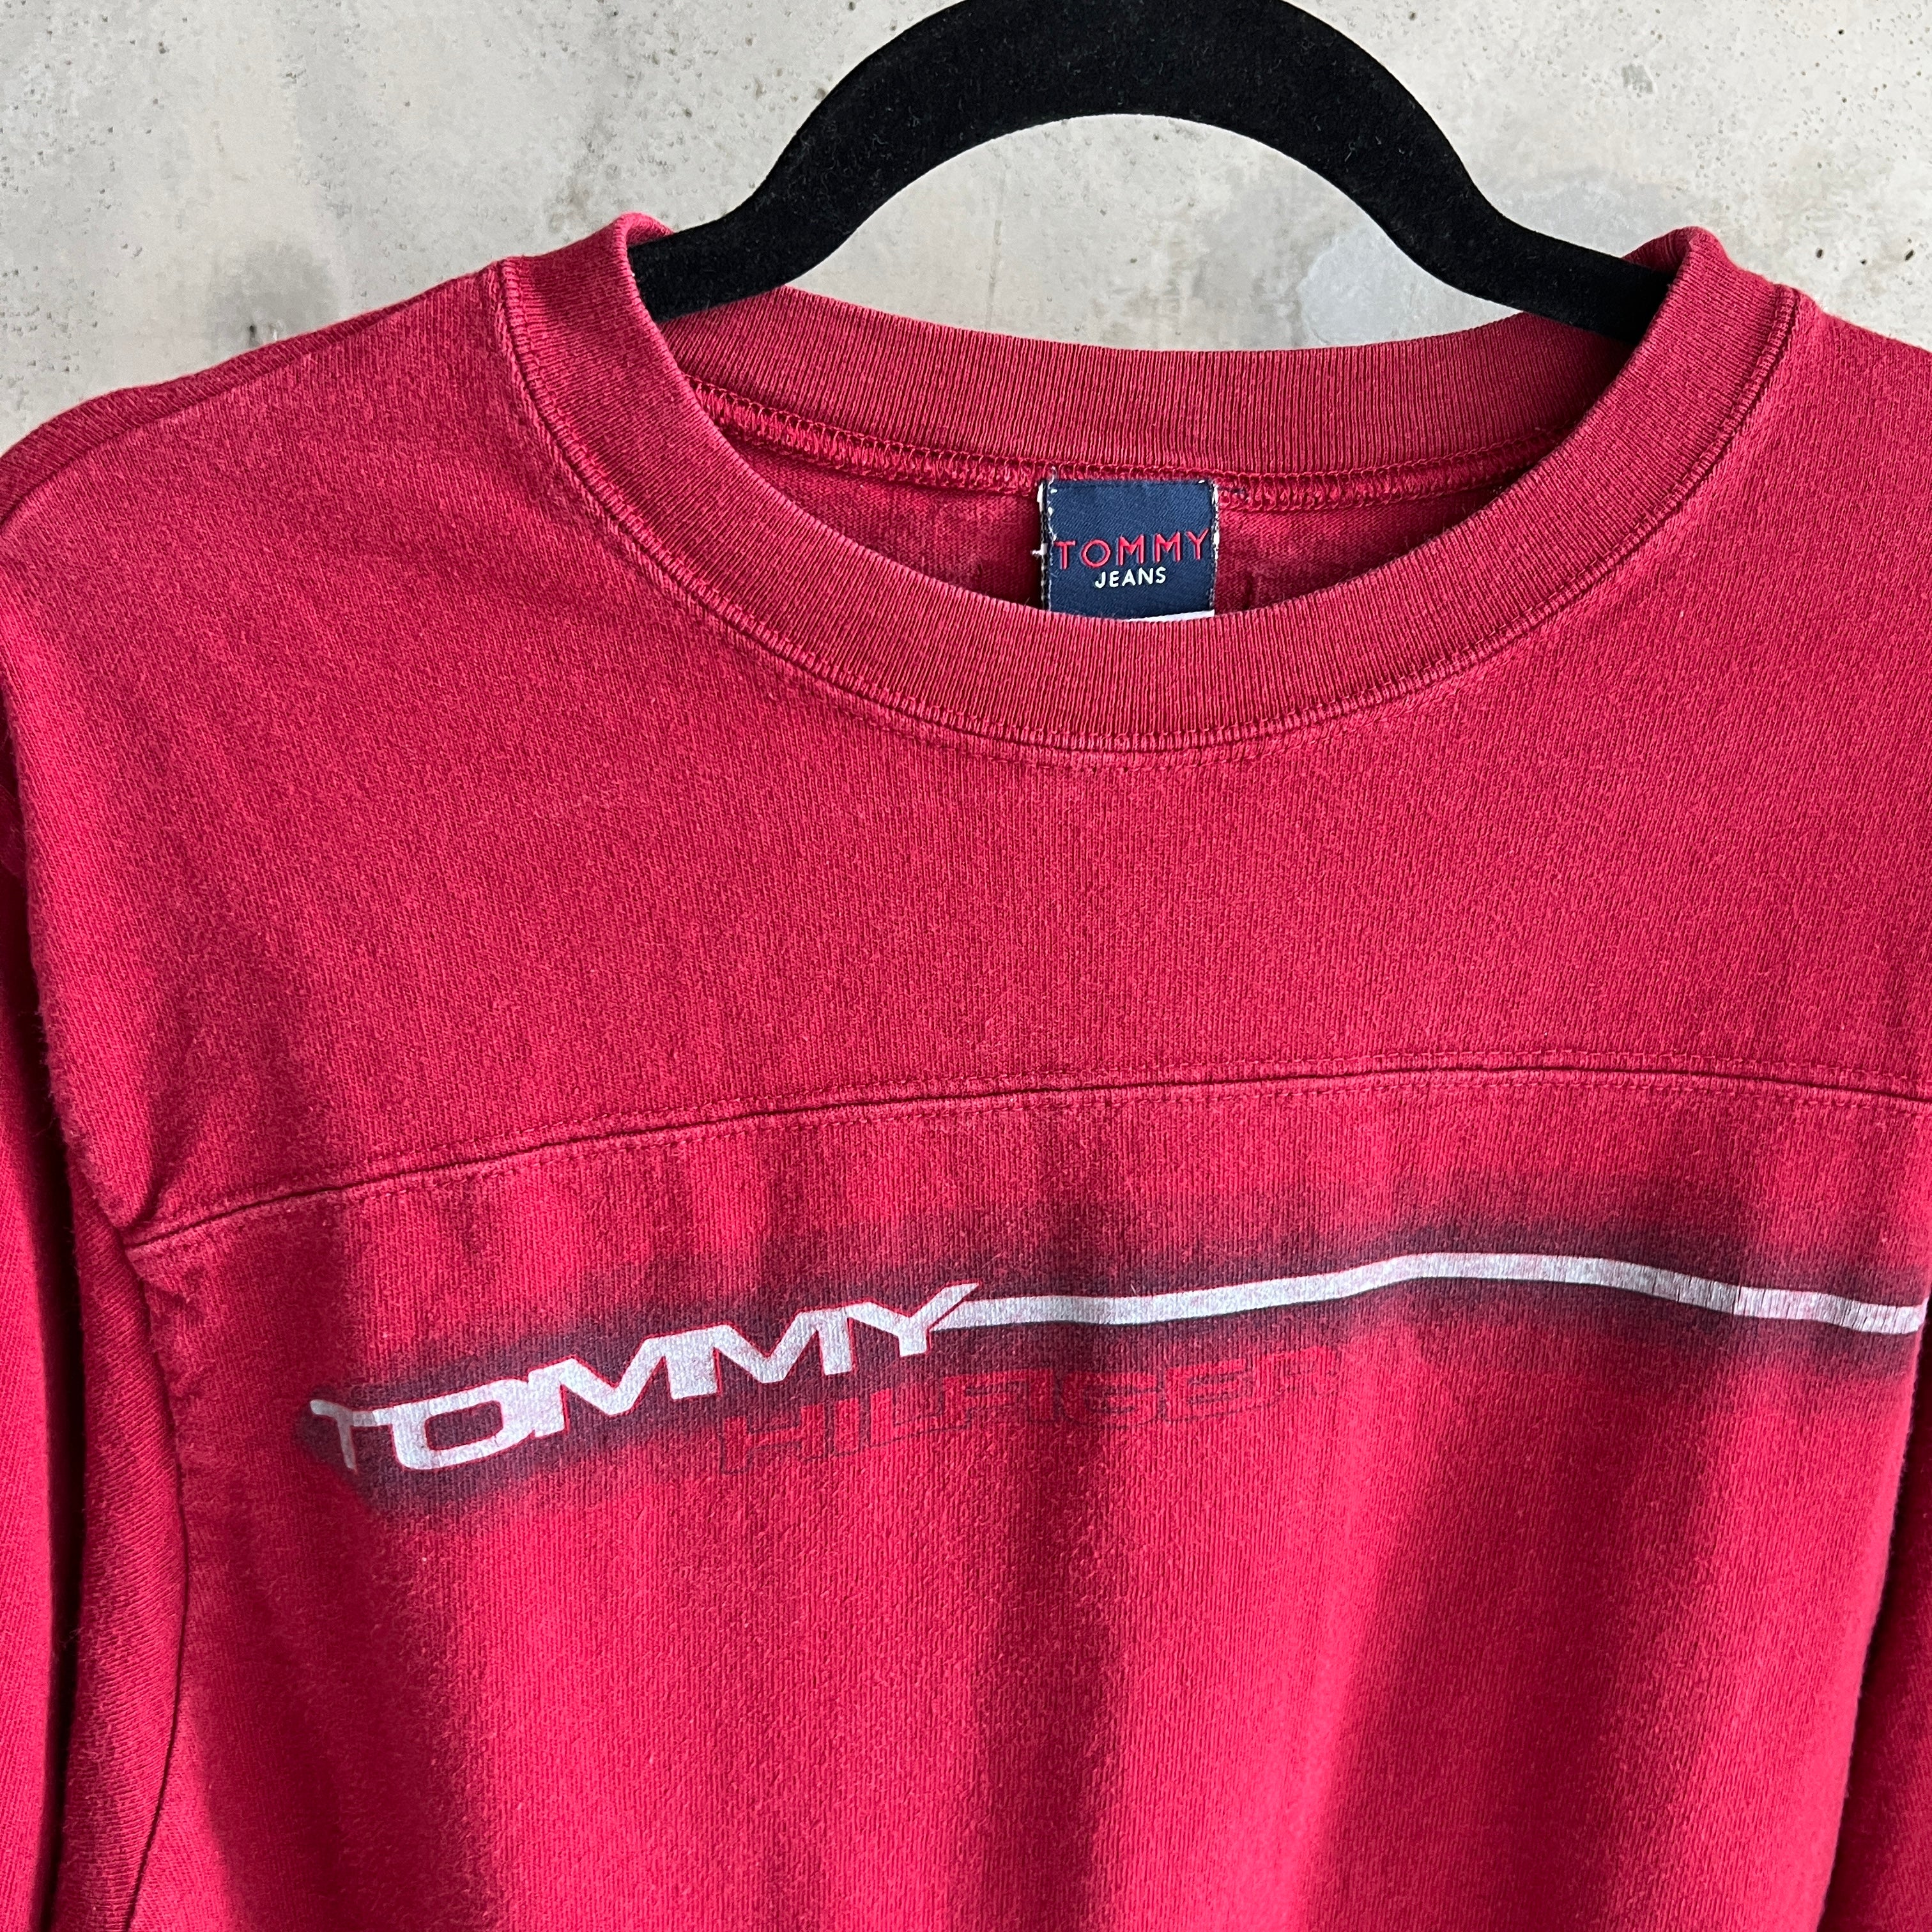 Vintage Tommy Jeans Long Sleeve T-Shirt